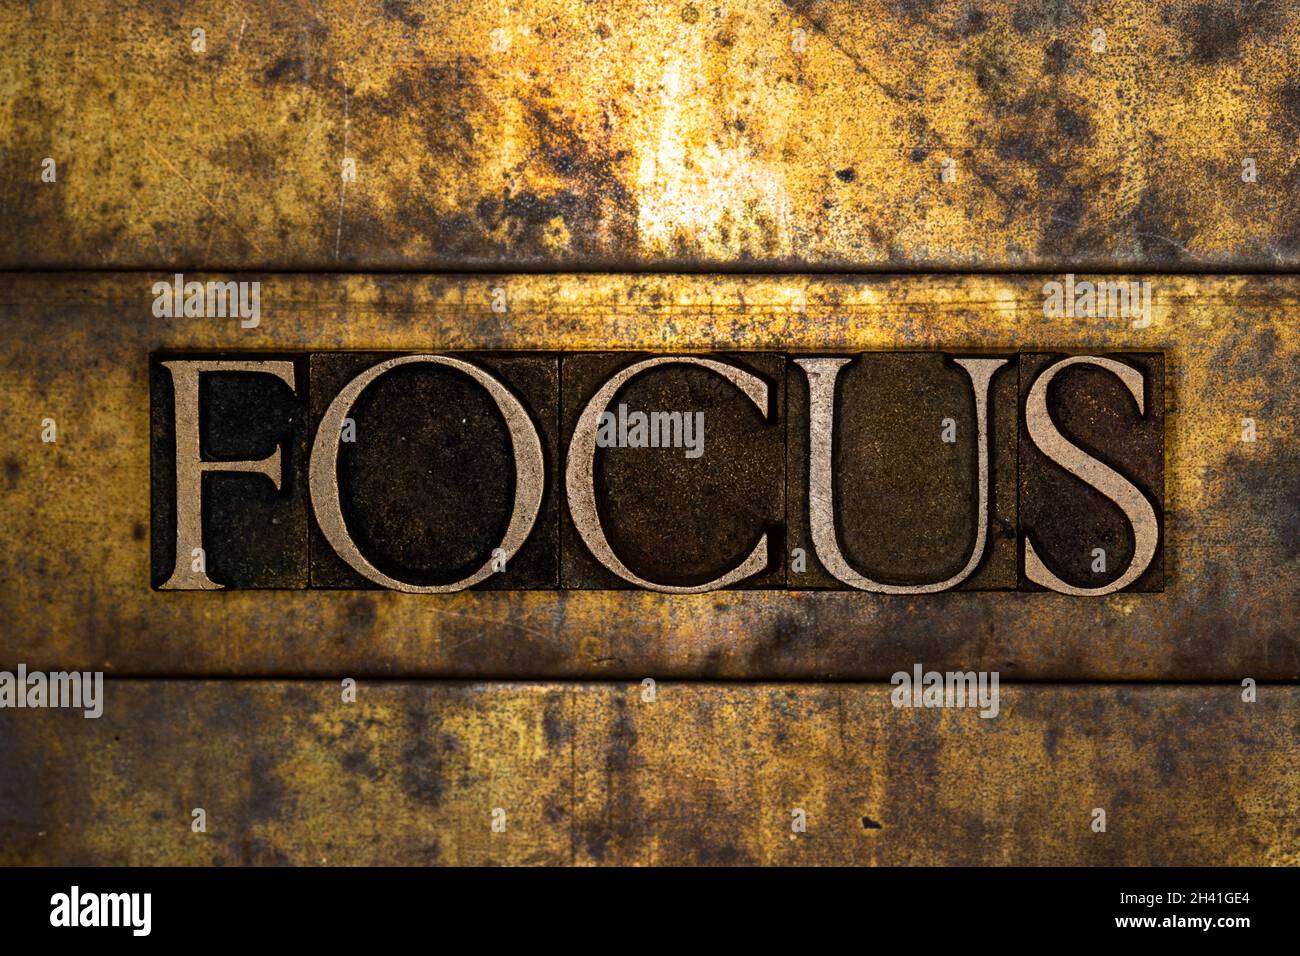 Focus text message on textured grunge copper and vintage gold background Stock Photo